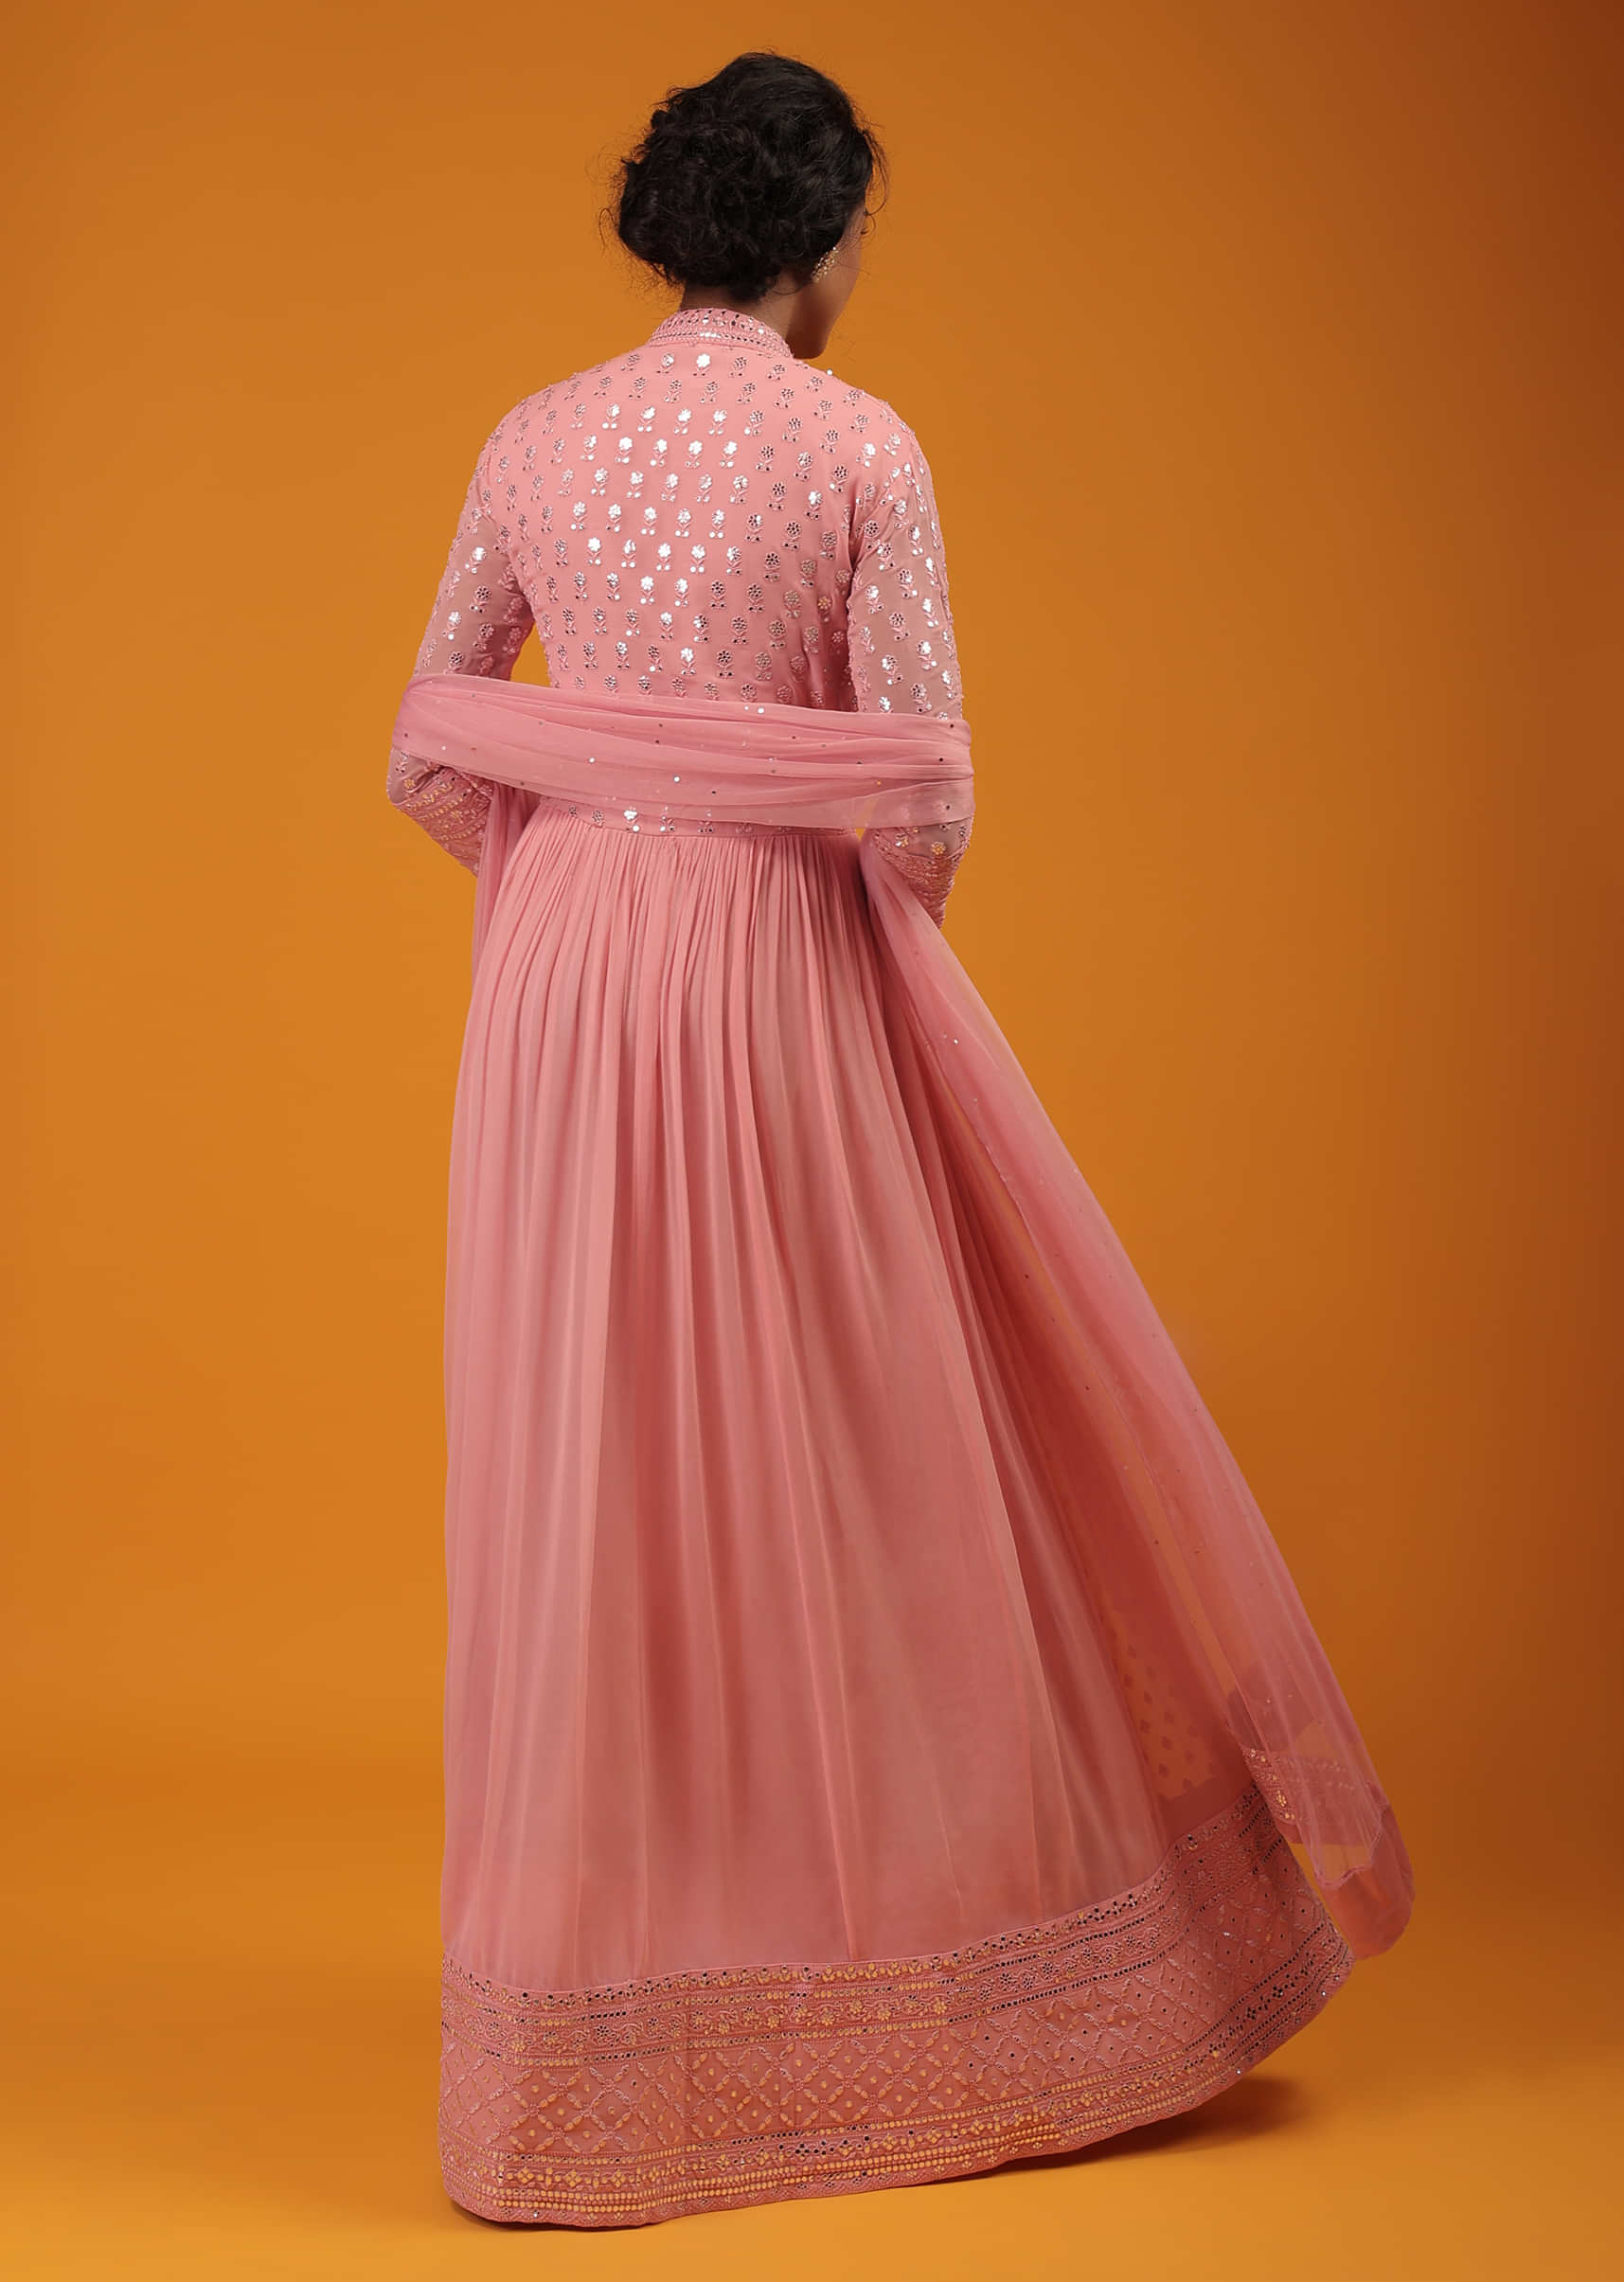 Strawberry Ice Pink Anarkali Suit With Mandarin Collar And Gotta Work In Floral Pattern